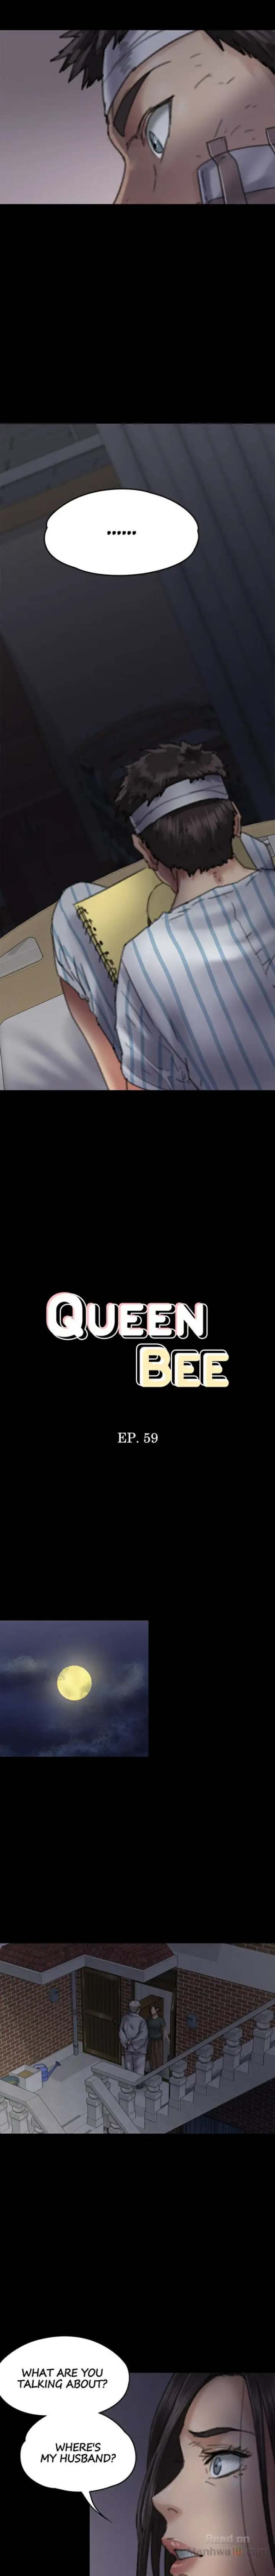 Queen Bee - Page 2